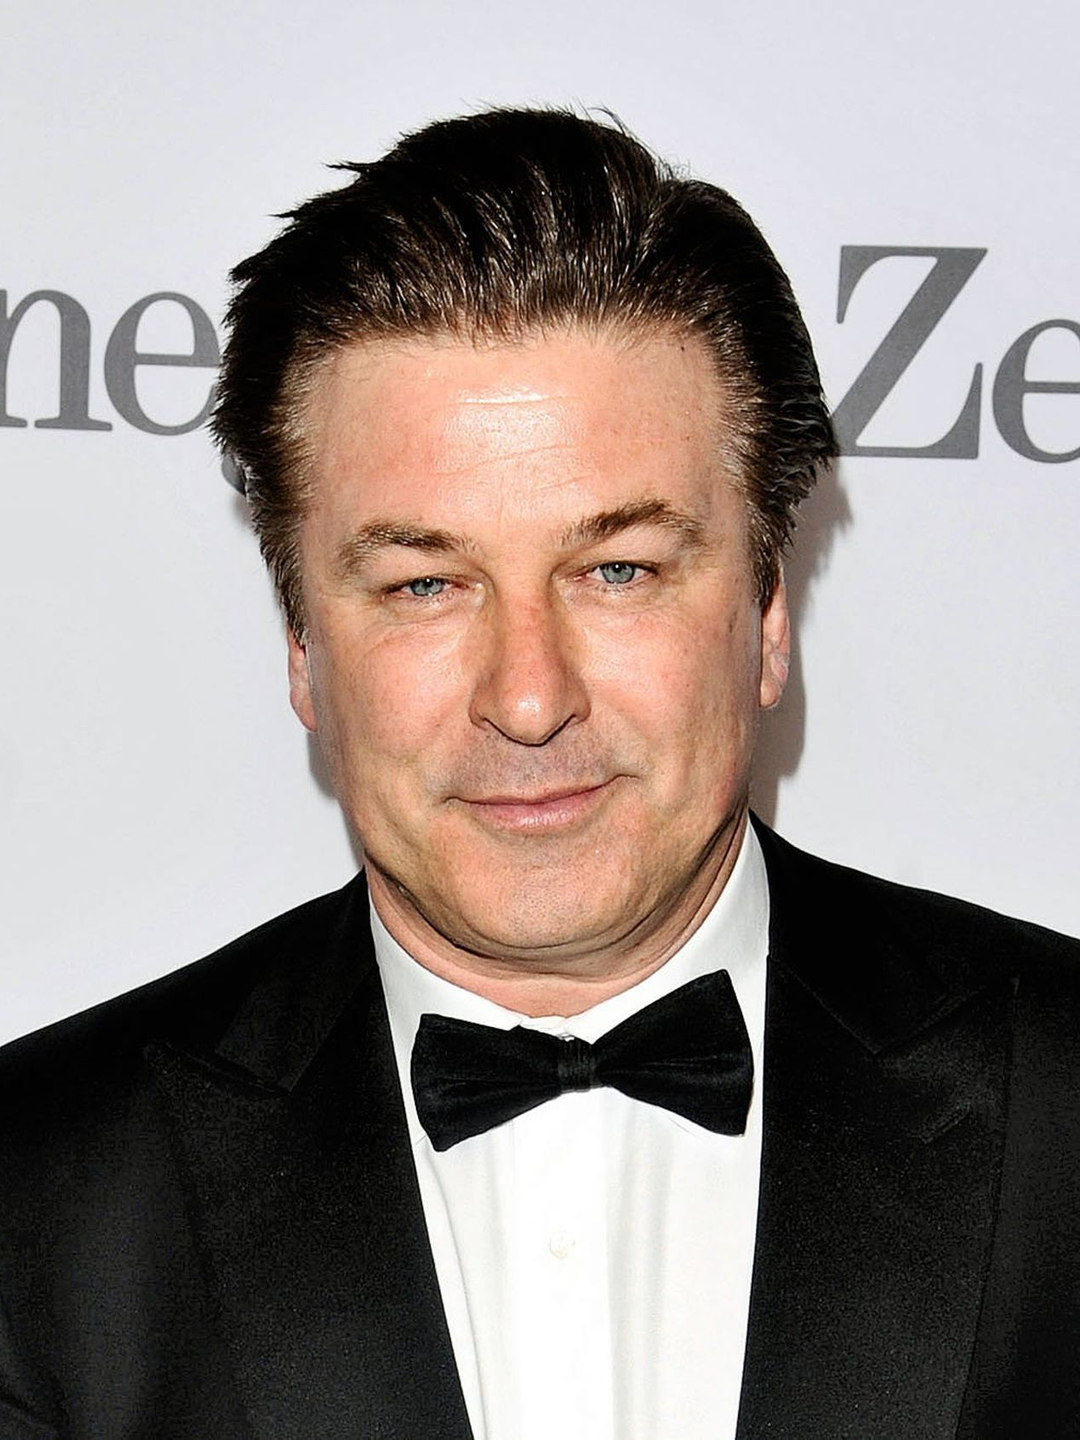 Alec Baldwin how did he became famous